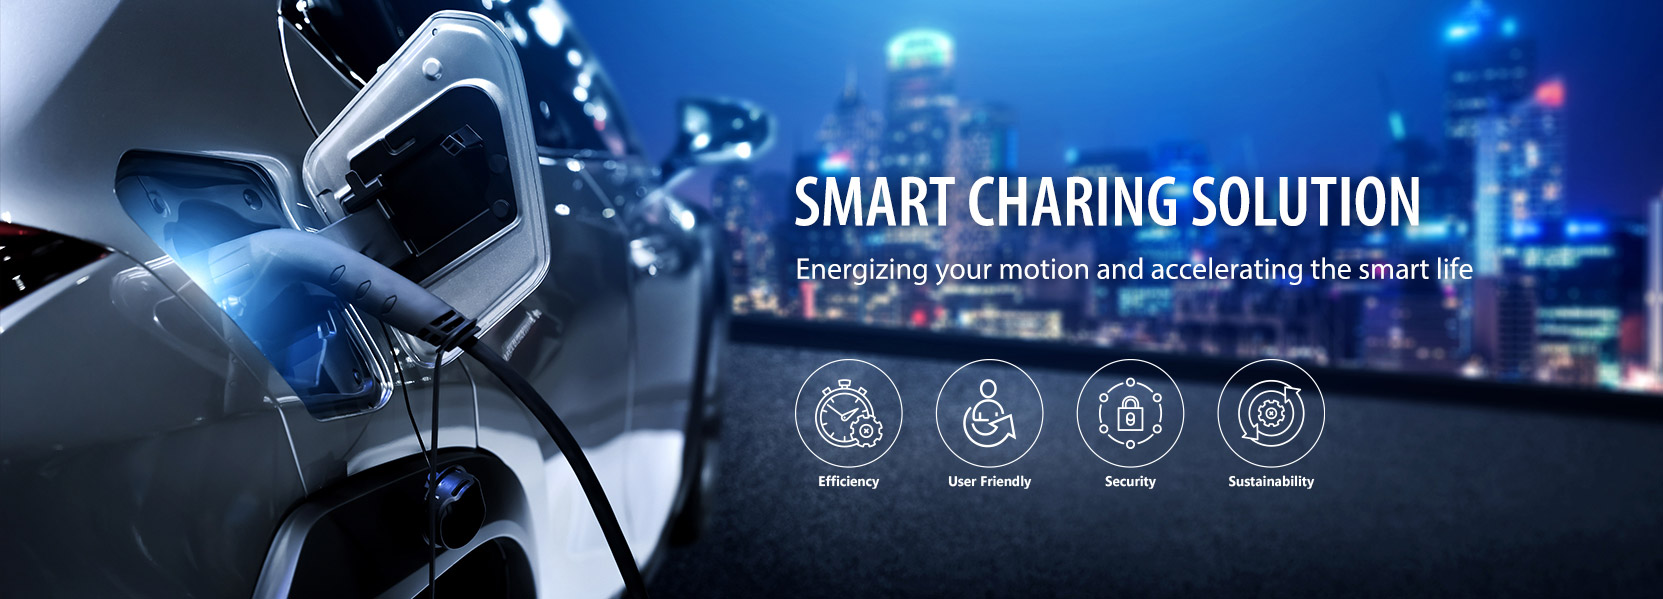 SMART-CHARING_banner